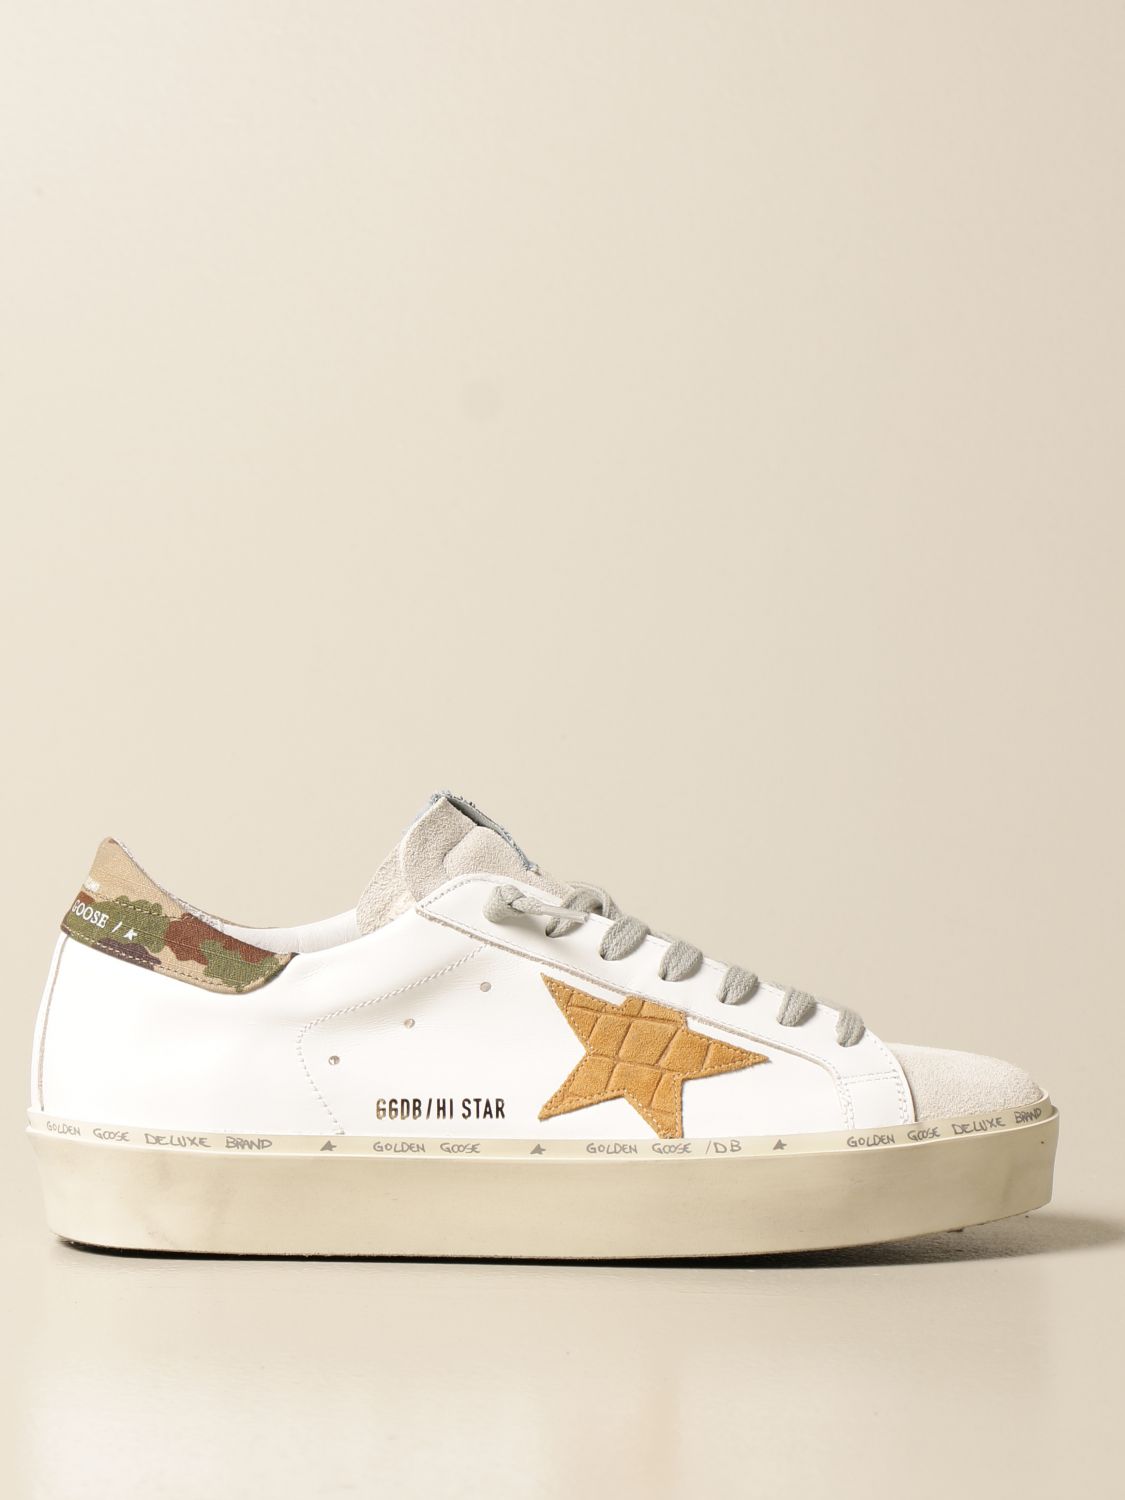 GOLDEN GOOSE: Histar sneakers in leather and suede - White | Golden ...